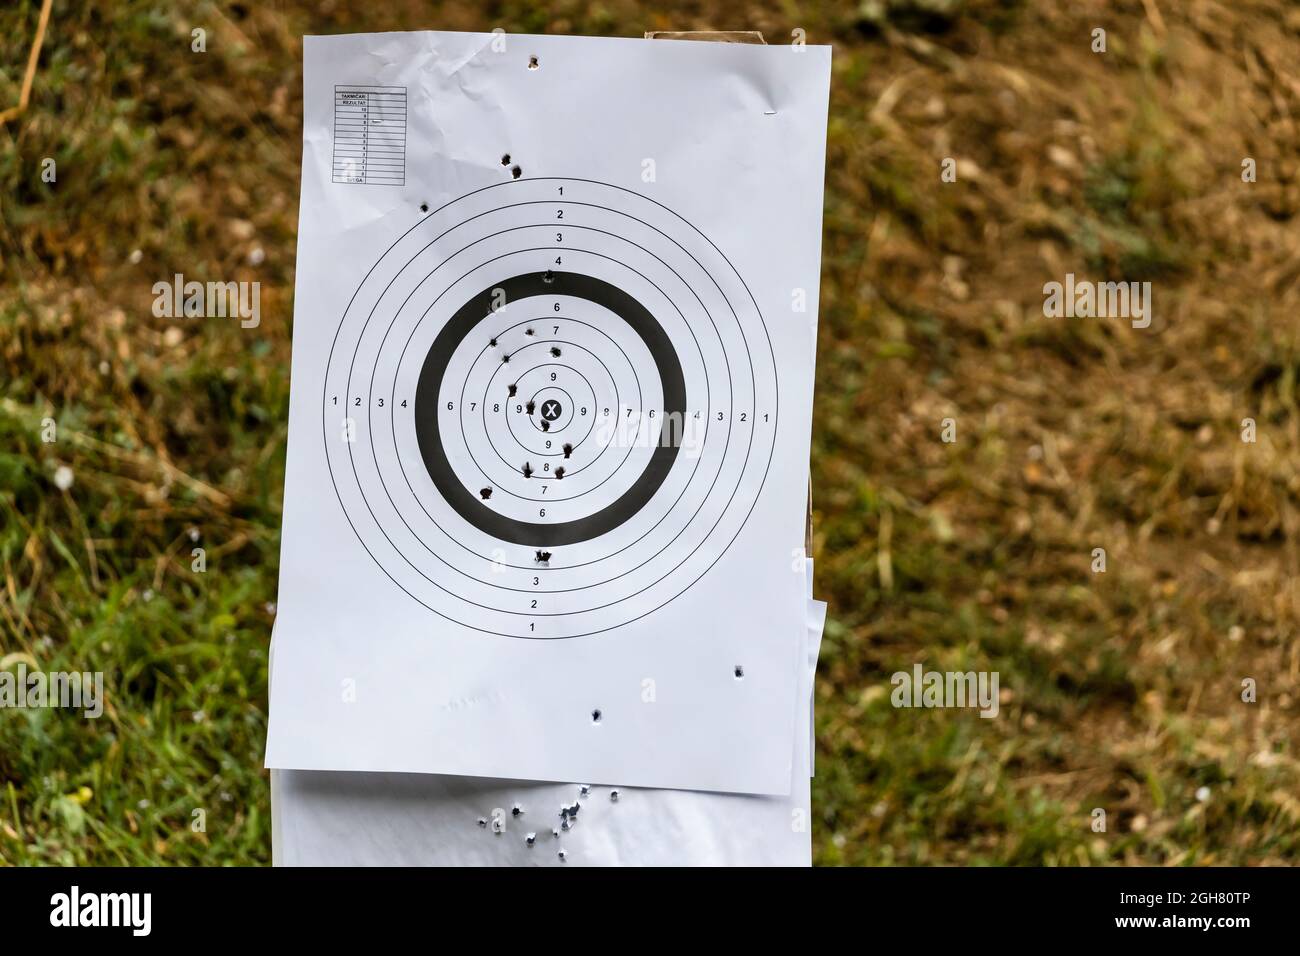 Paper target on a shooting range with bullet holes Stock Photo